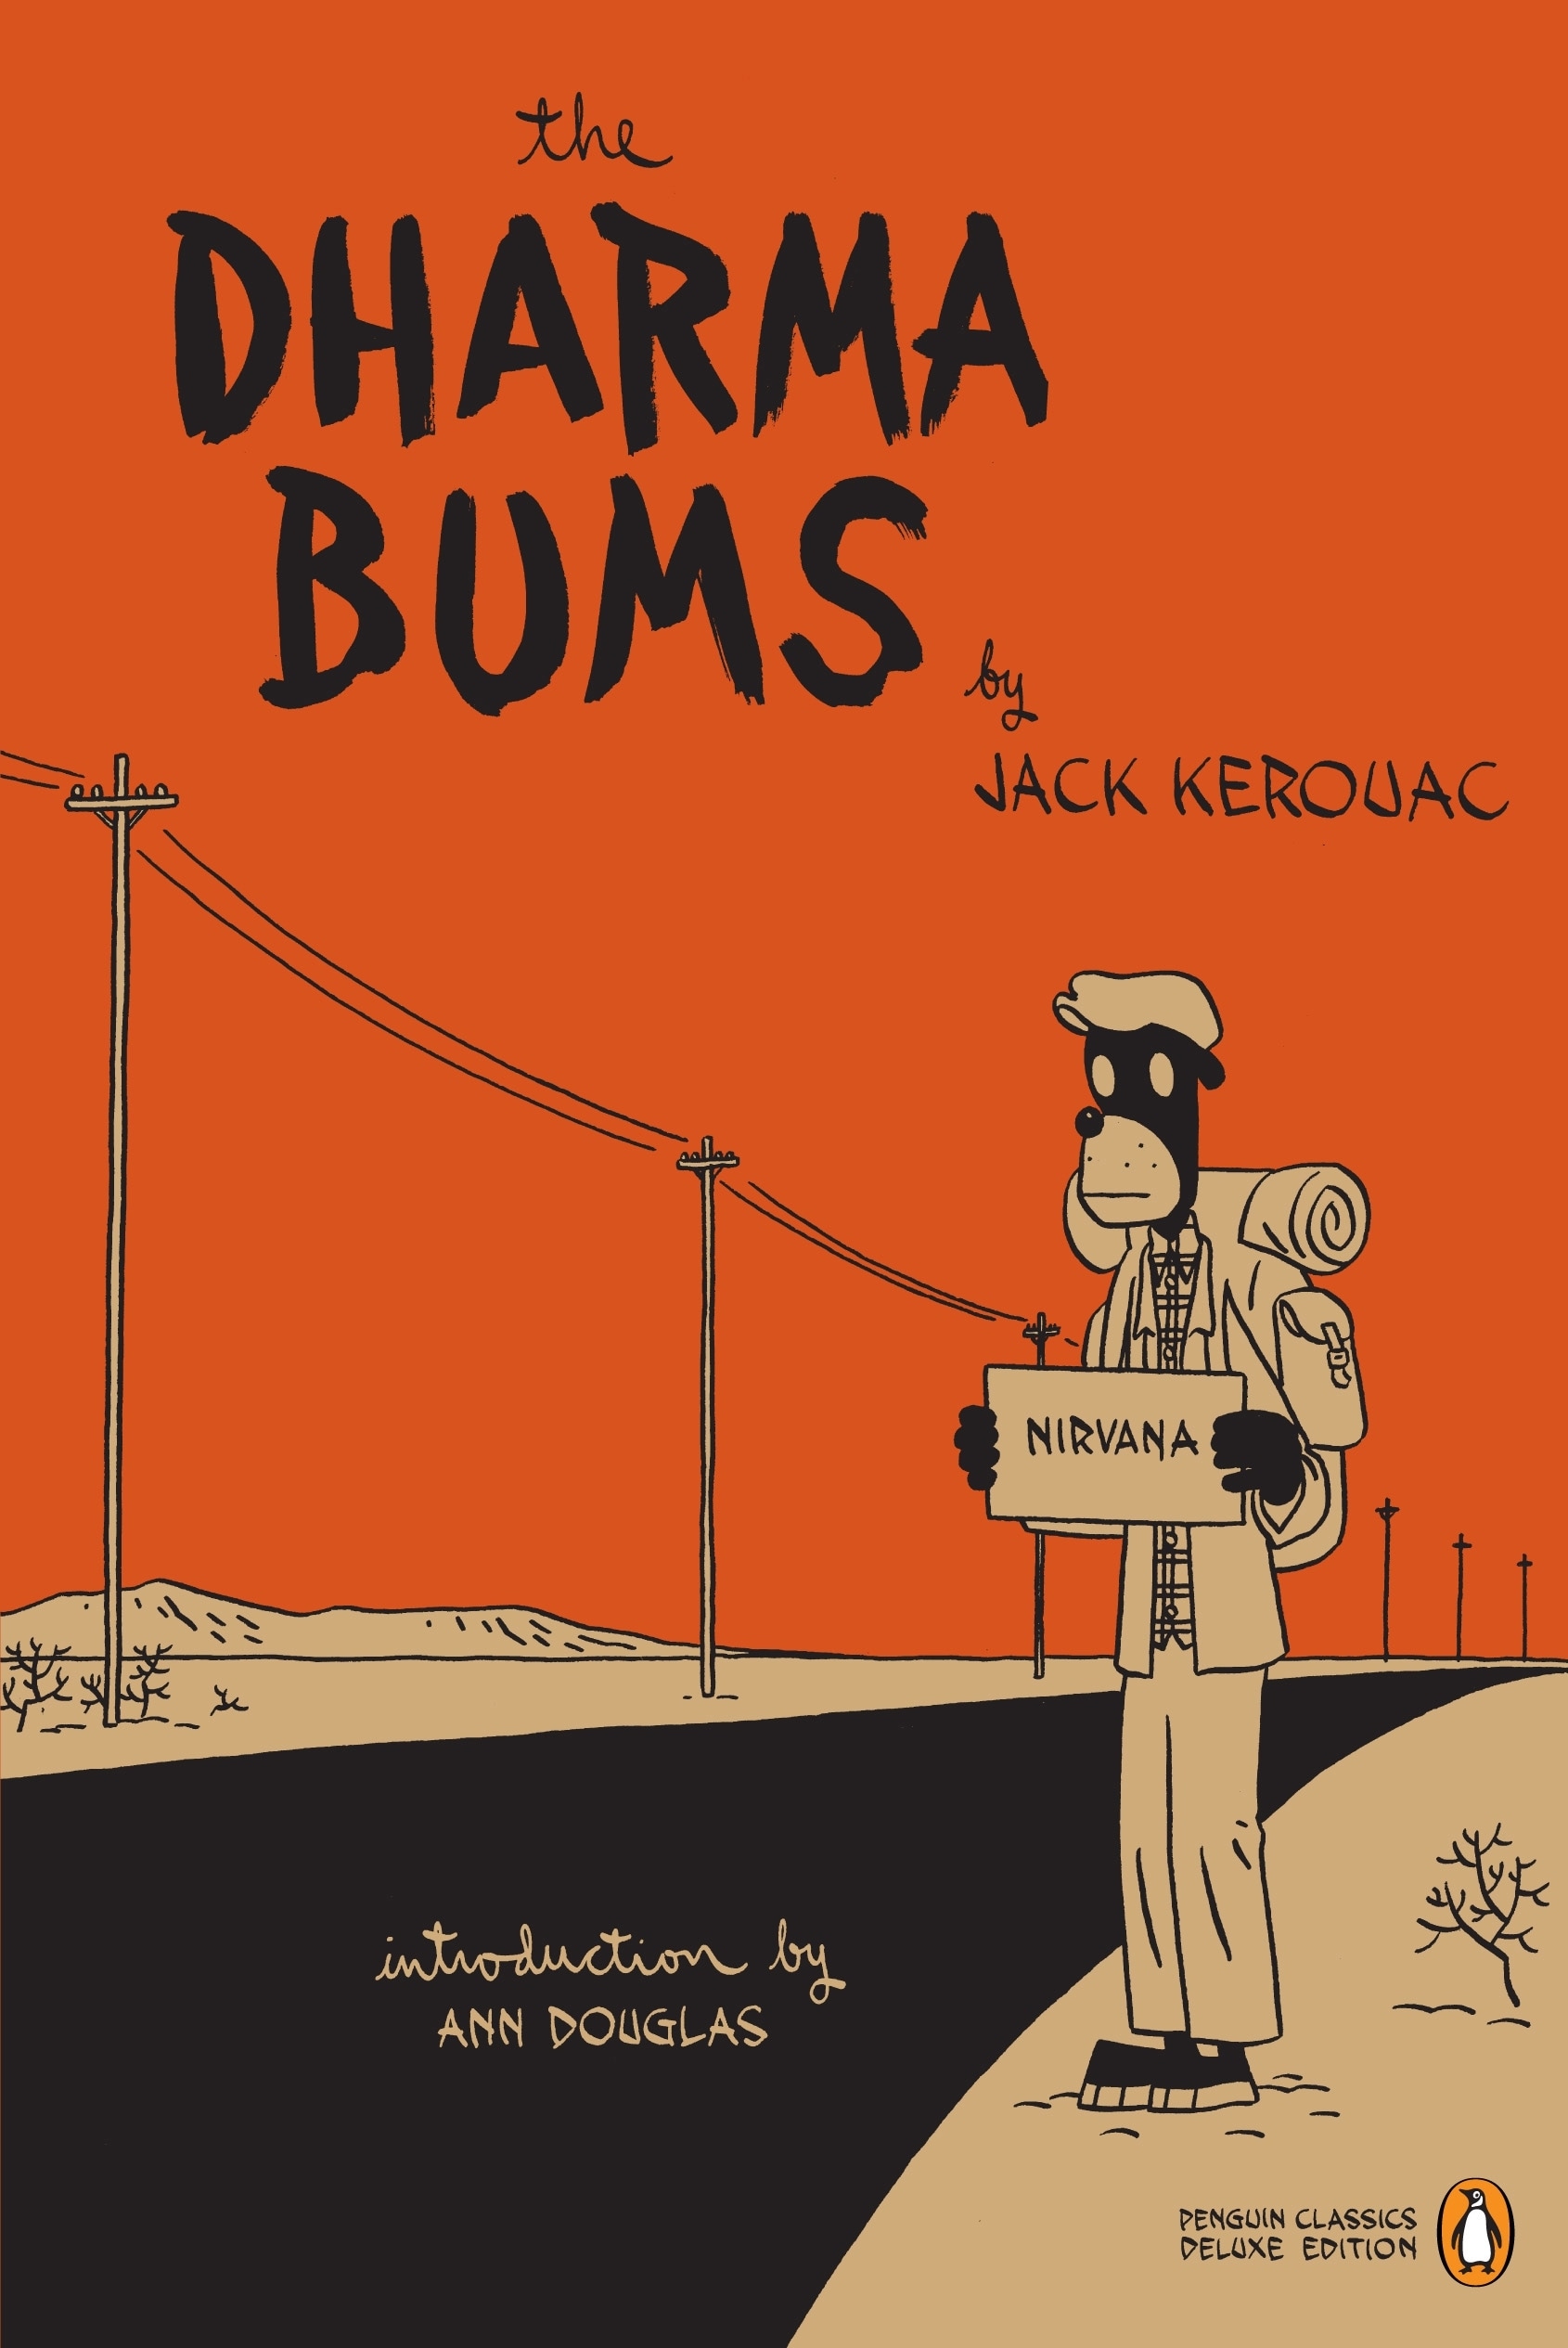 Book “The Dharma Bums” by Jack Kerouac — April 5, 2007